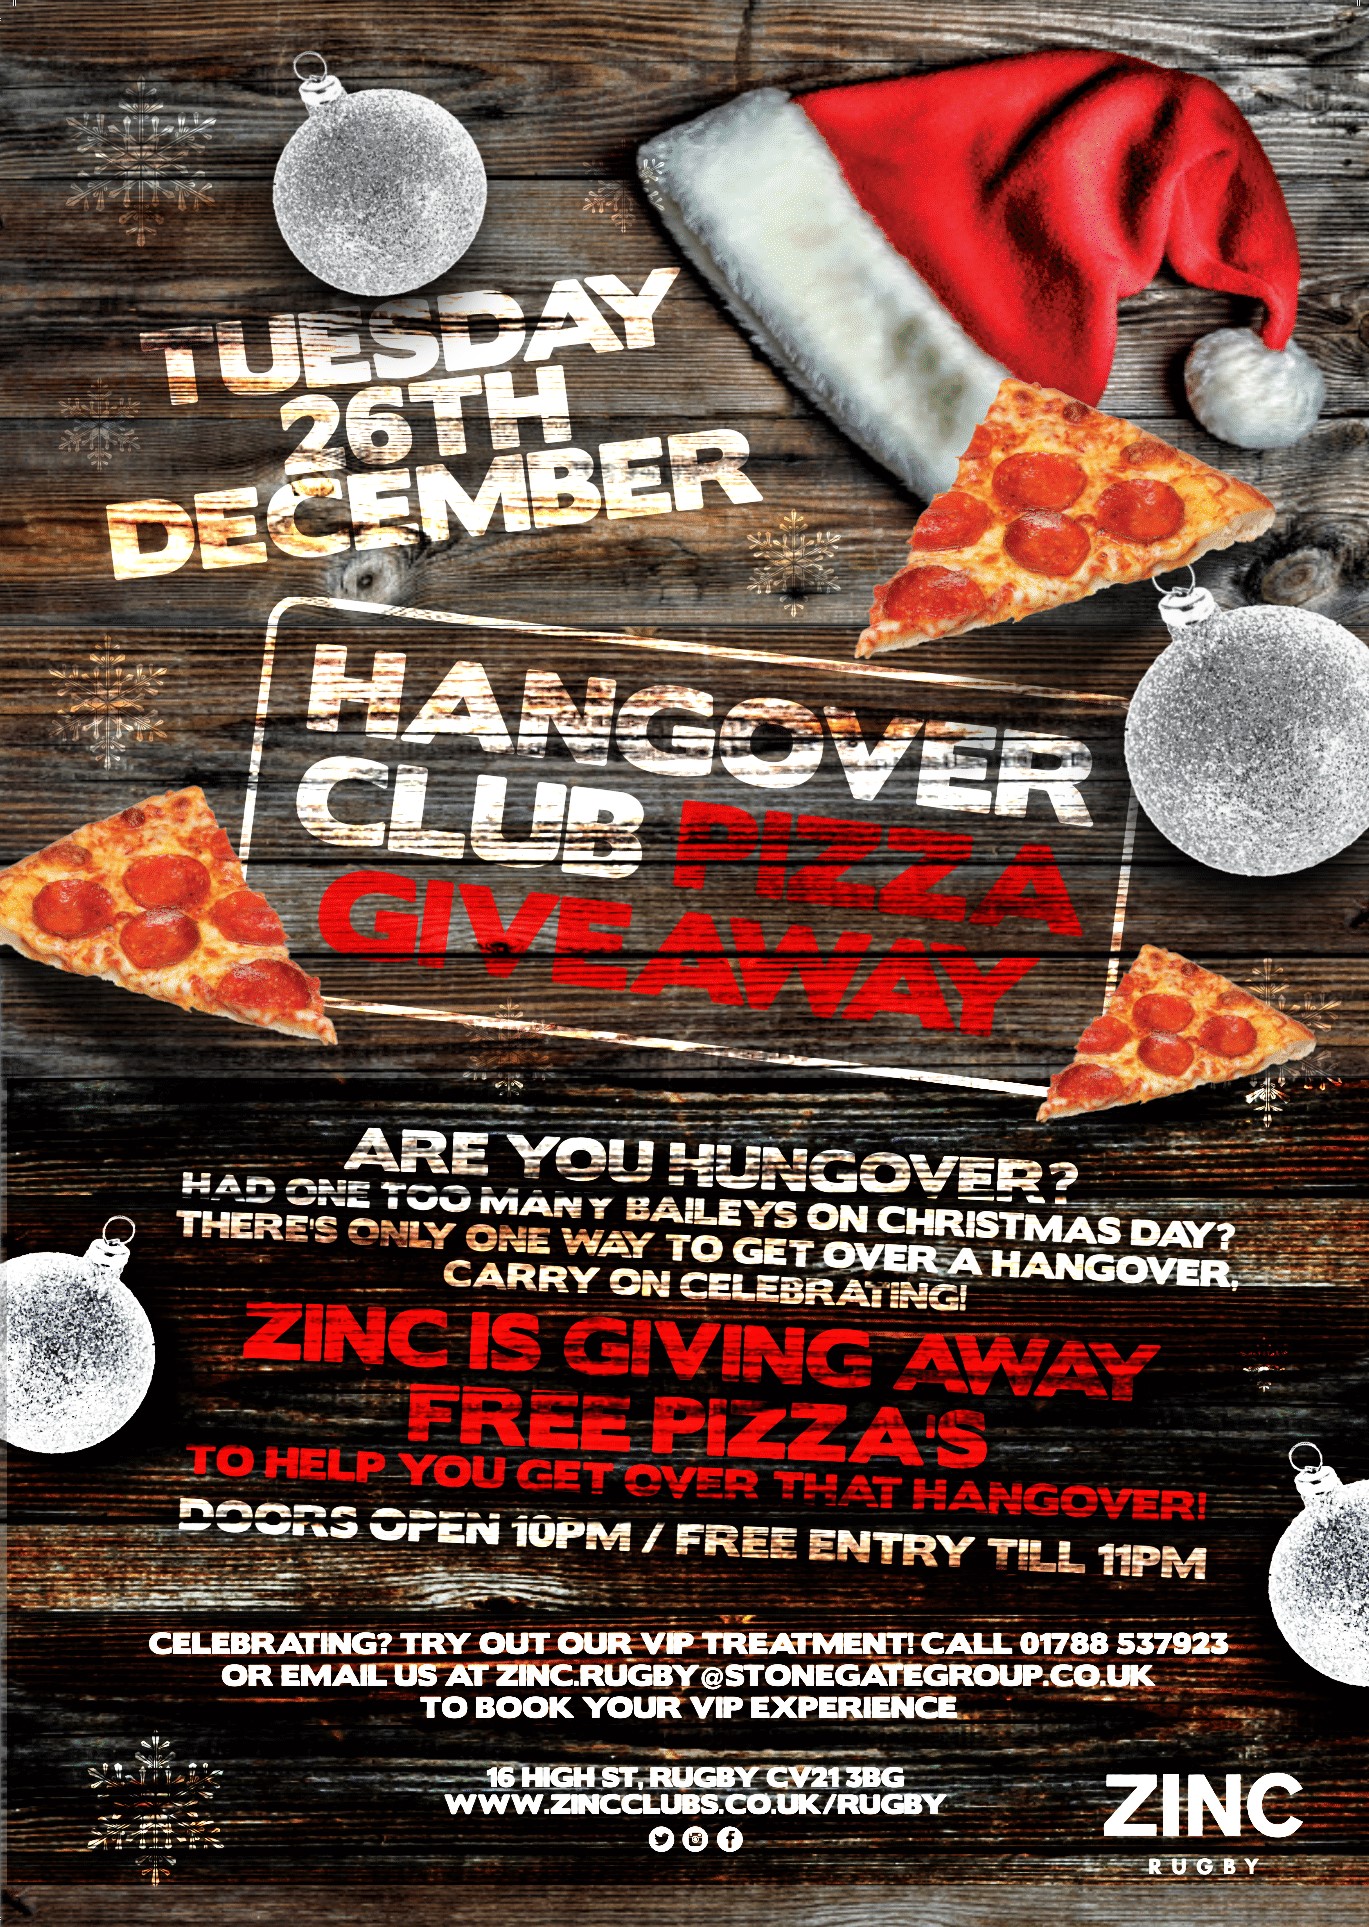 The Hangover Club Pizza Giveaway